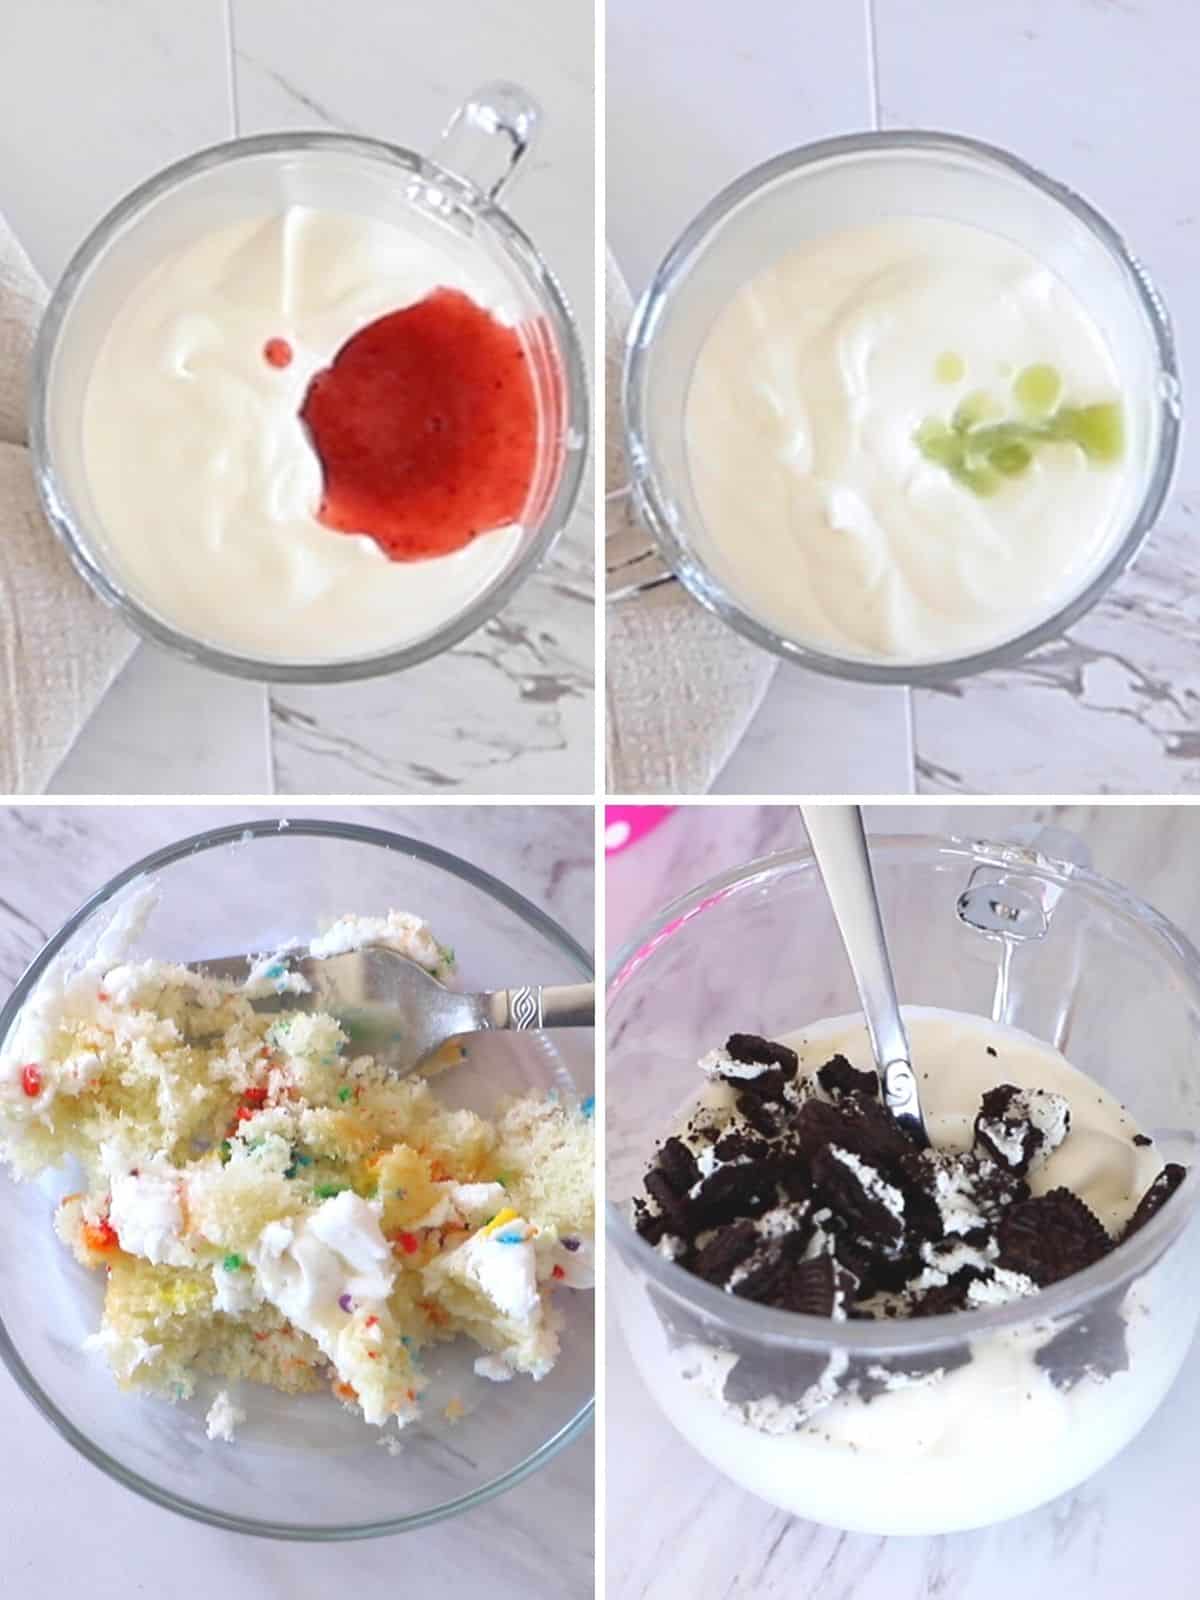 A collage of four images showing how to flavor ice cream in different ways.